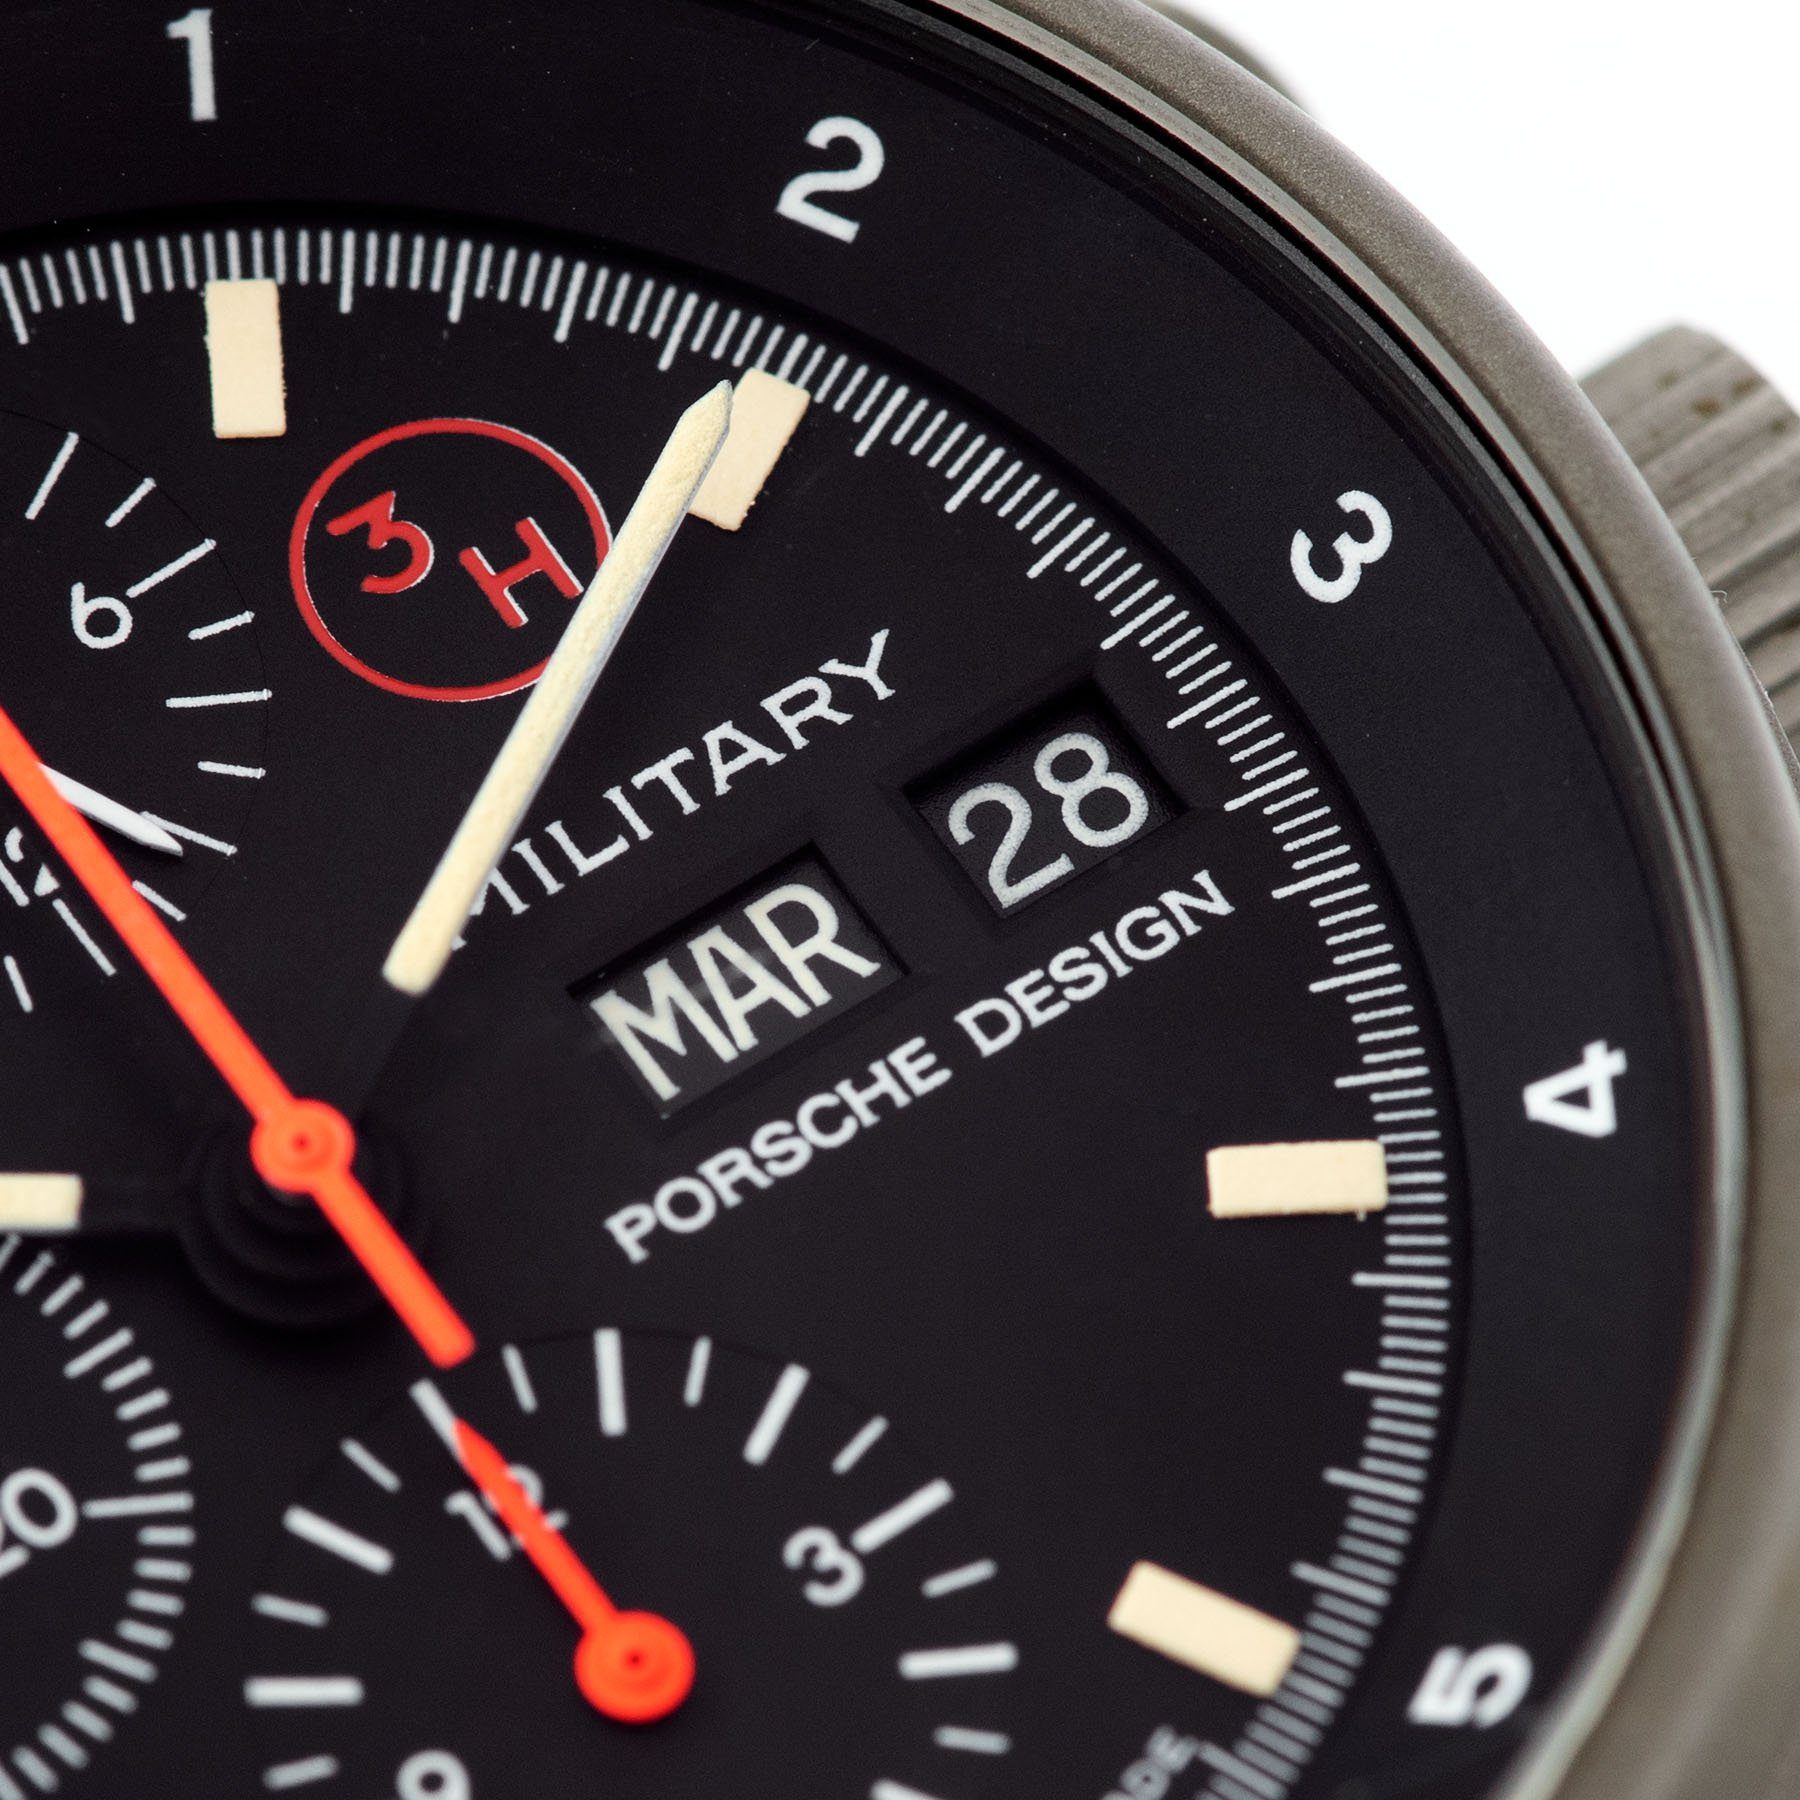 Porsche Design by Orfina 'Military' Chronograph Reference 7177 with day and date windows